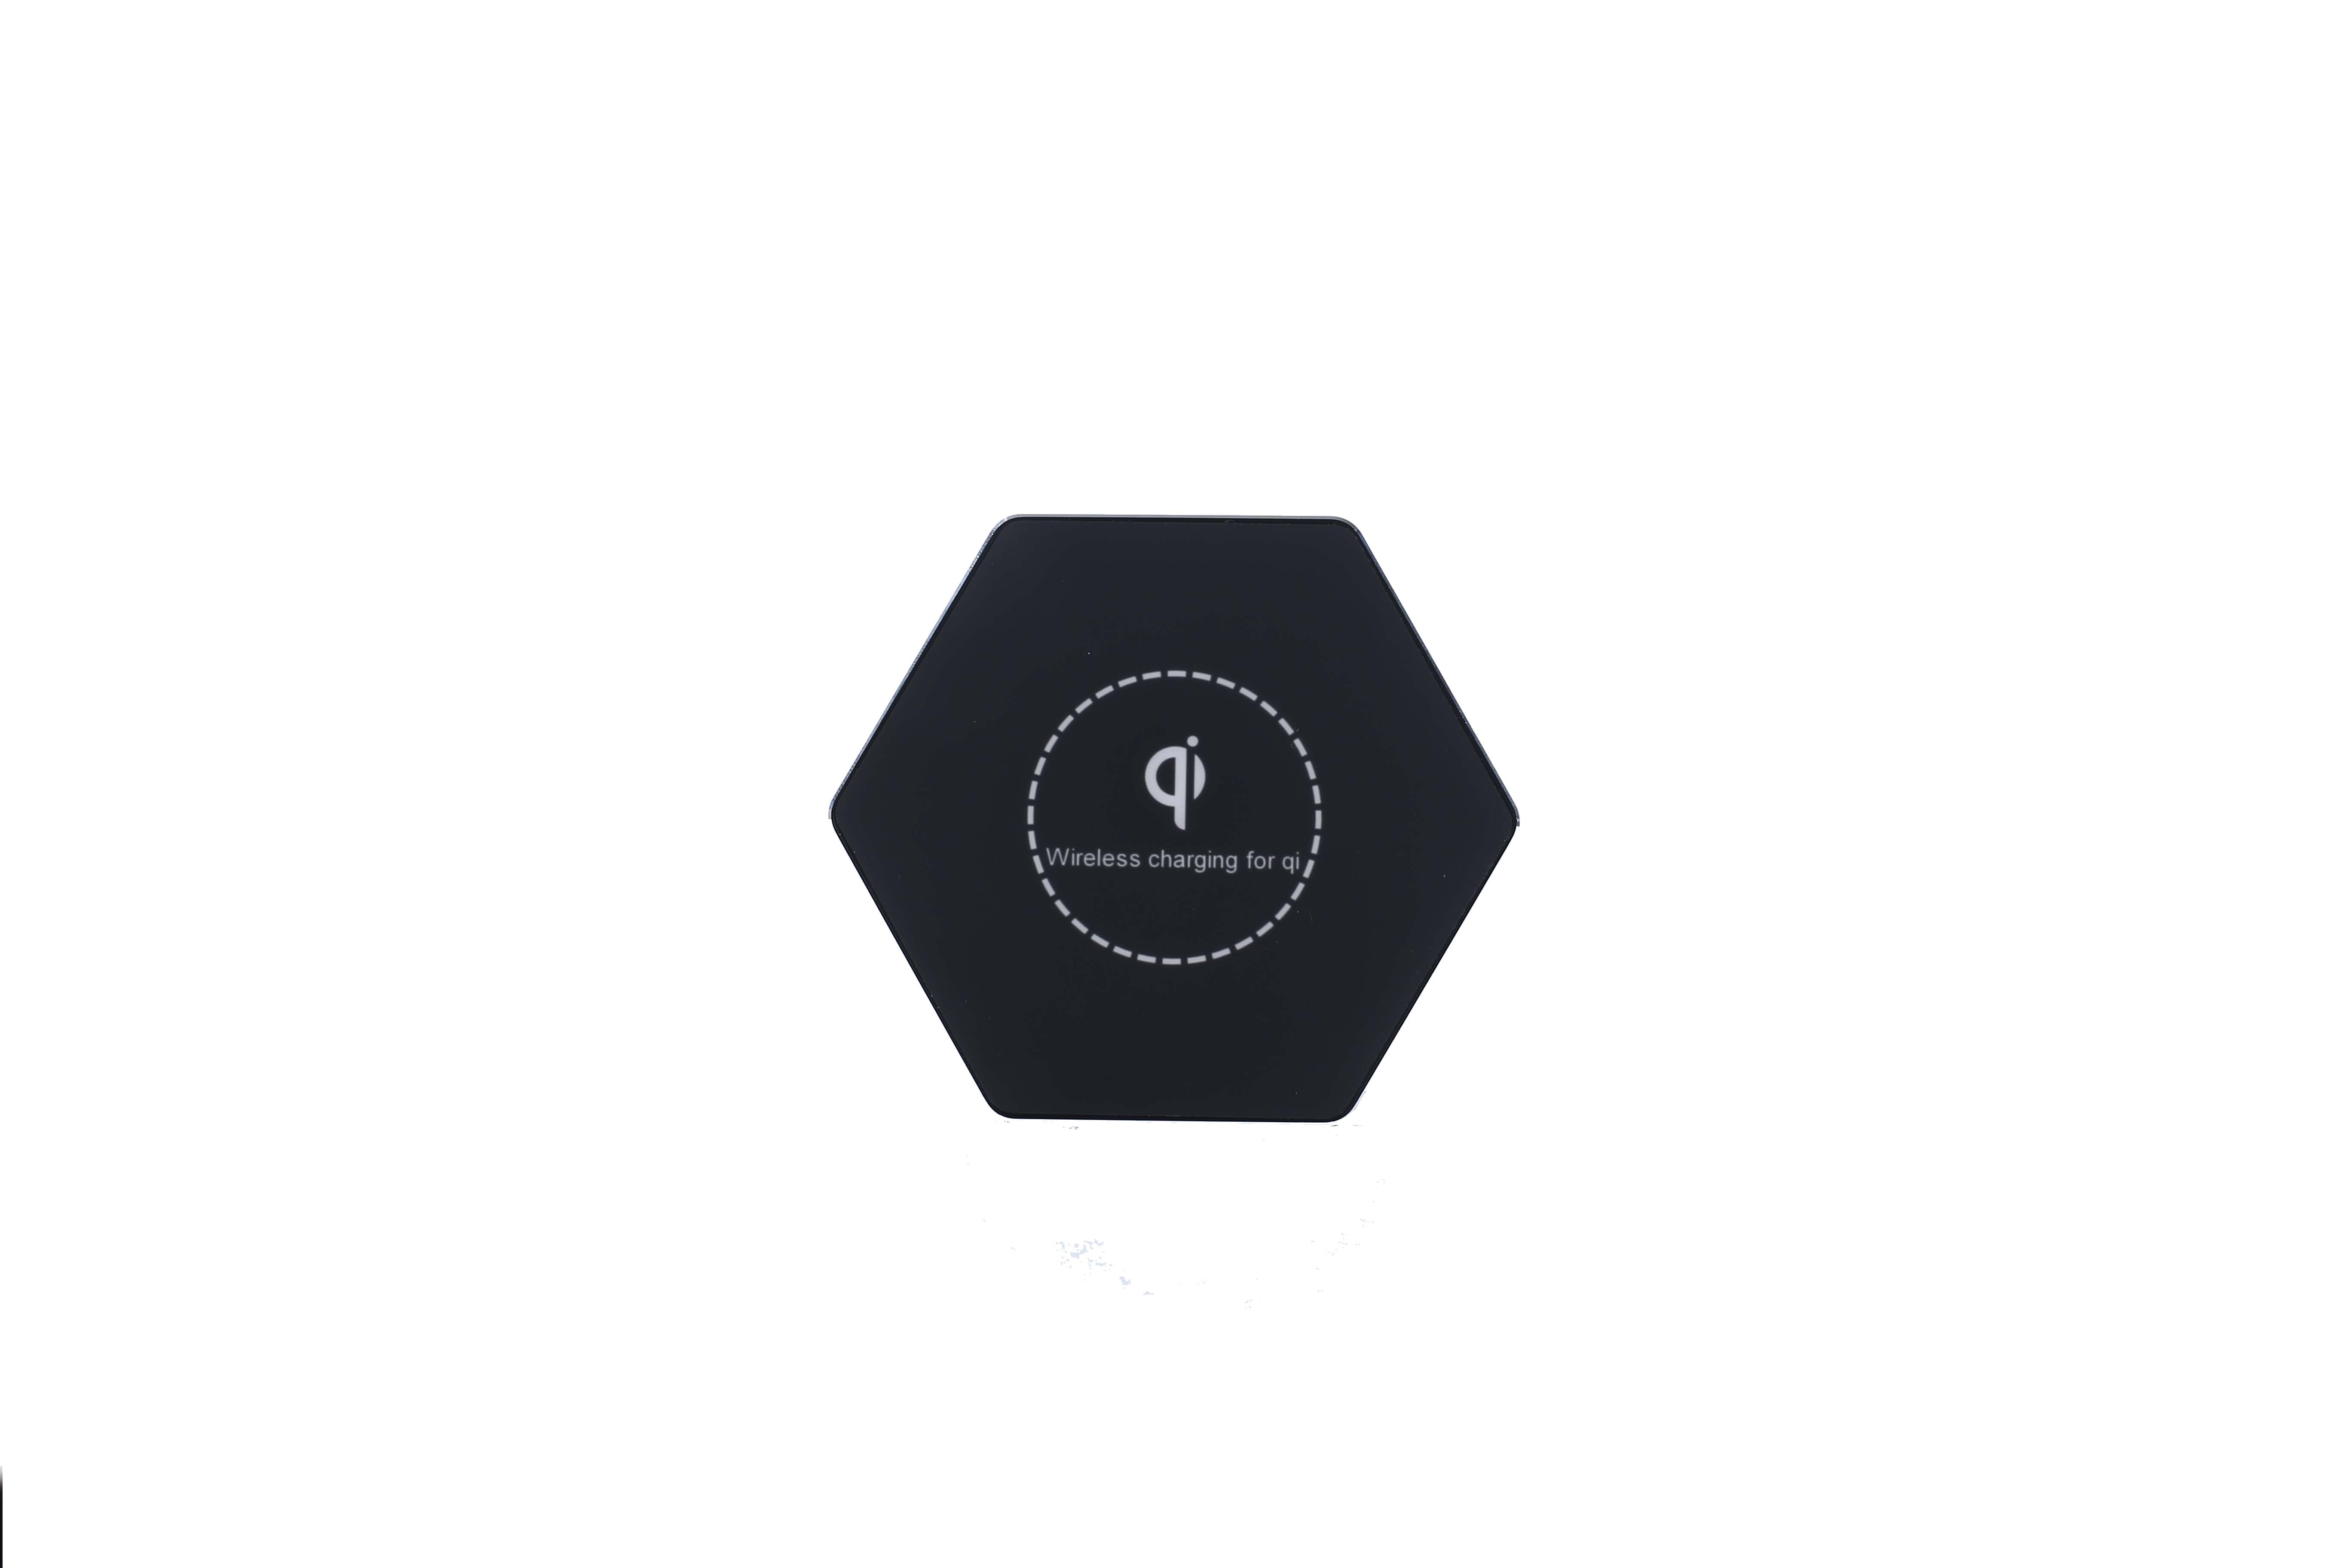 ImPrinted Wireless Qi charger hexagone